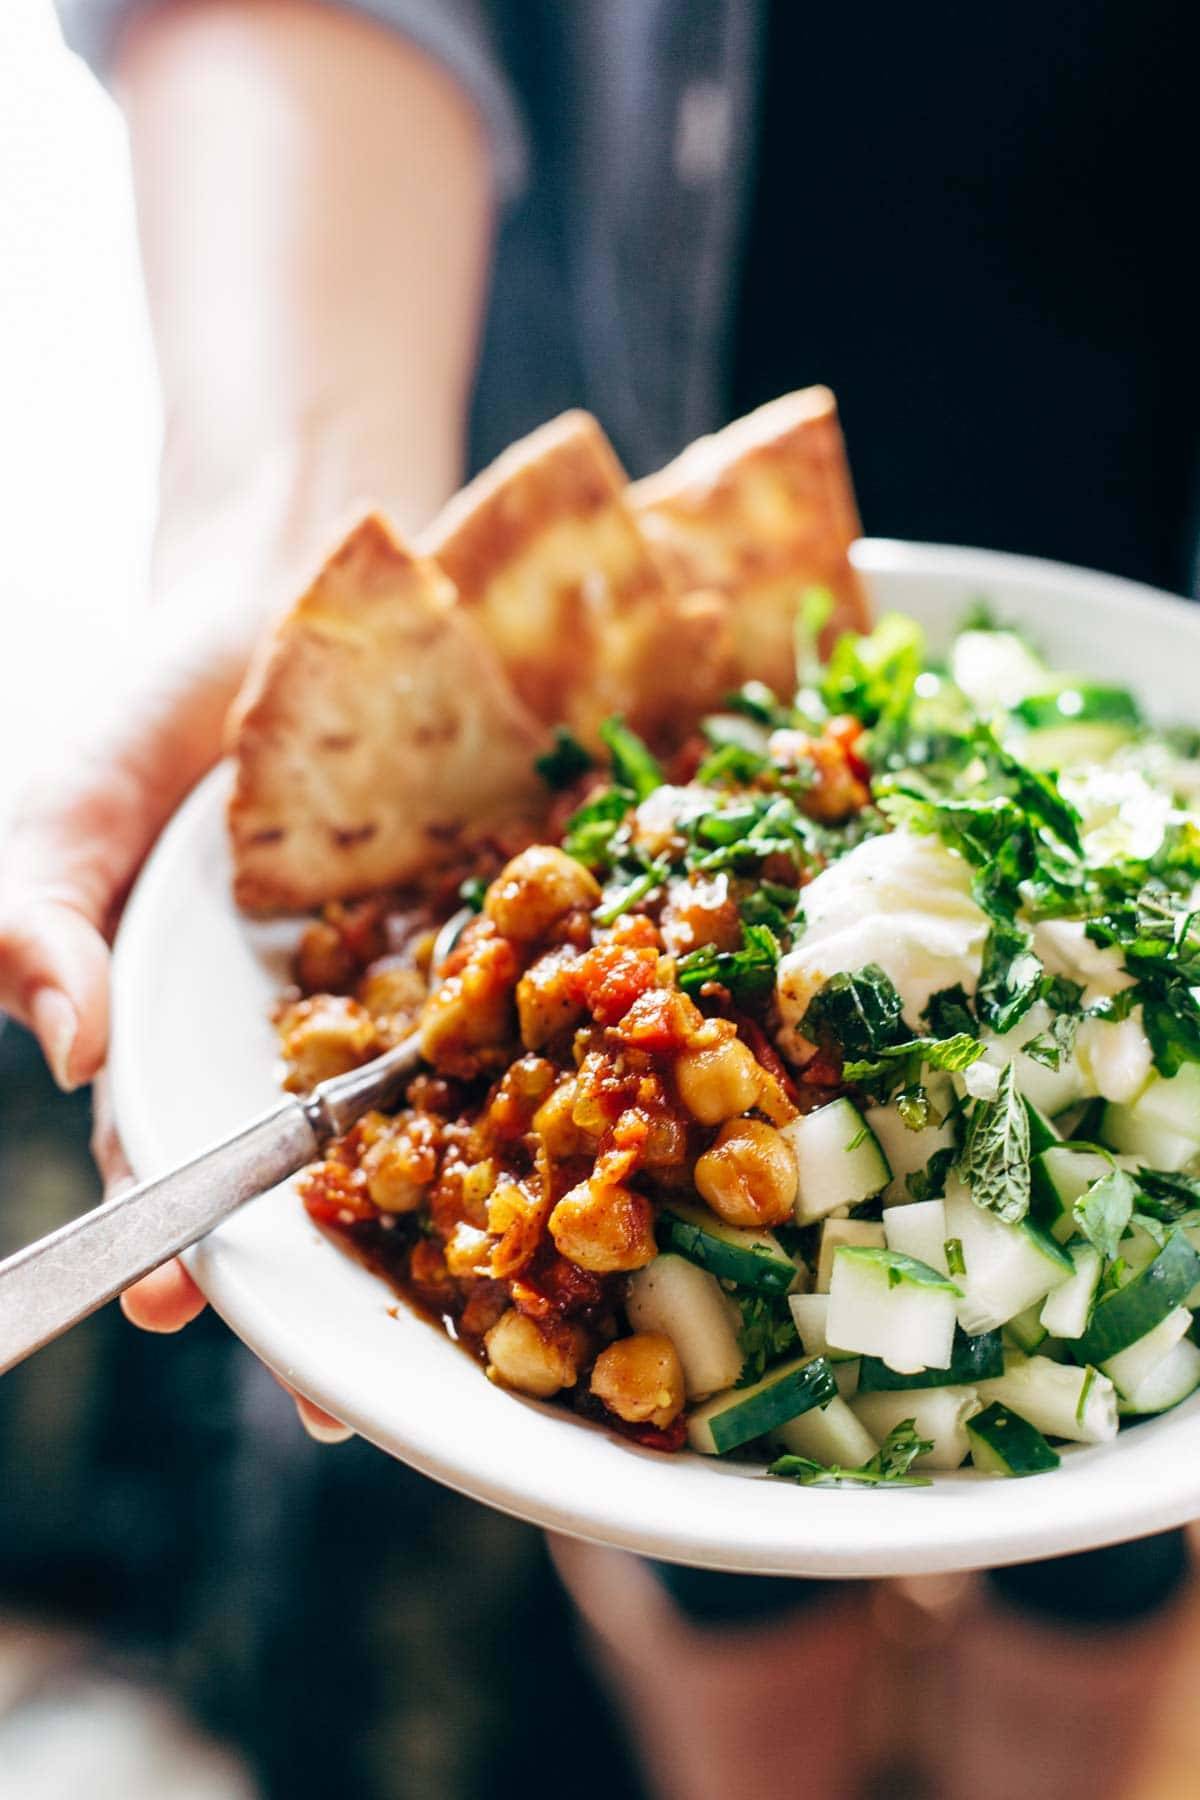 Detox Moroccan-Spiced Chickpea Glow Bowl Recipe - Pinch of Yum